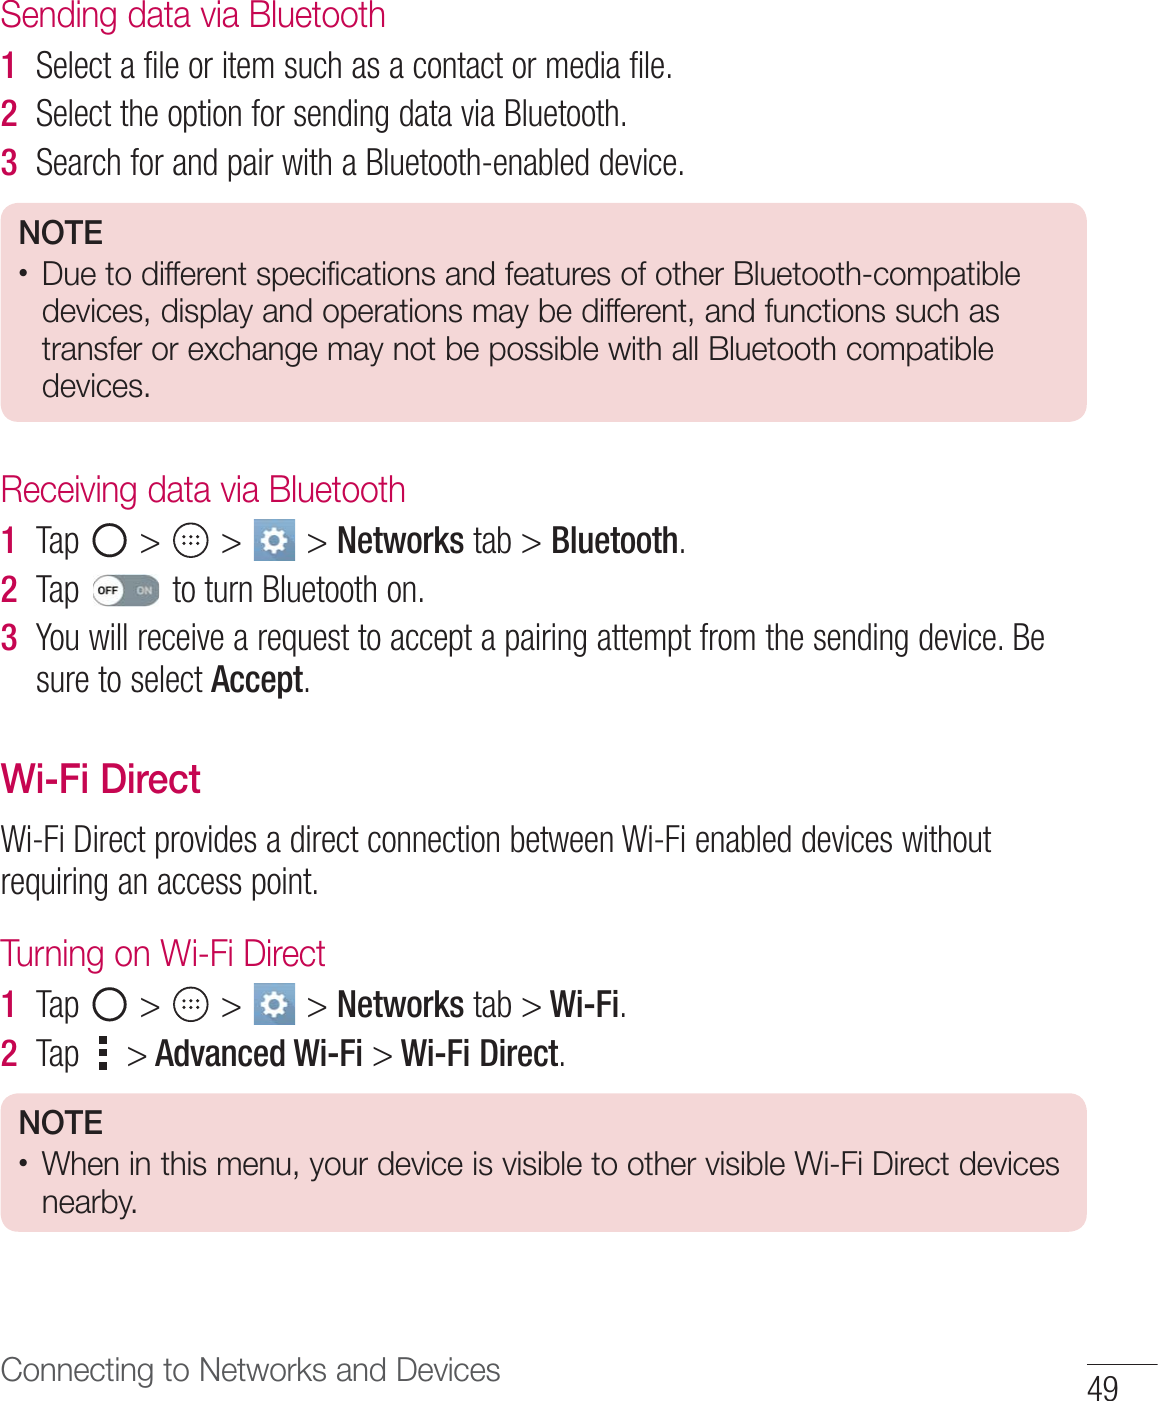 Connecting to Networks and DevicesSending data via Bluetooth1  4FMFDUBGJMFPSJUFNTVDIBTBDPOUBDUPSNFEJBGJMF2  4FMFDUUIFPQUJPOGPSTFOEJOHEBUBWJB#MVFUPPUI3  4FBSDIGPSBOEQBJSXJUIB#MVFUPPUIFOBCMFEEFWJDFNOTE tDue to different specifications and features of other Bluetooth-compatible devices, display and operations may be different, and functions such as transfer or exchange may not be possible with all Bluetooth compatible devices.Receiving data via Bluetooth1  5BQ   Networks UBCBluetooth2  5BQ UPUVSO#MVFUPPUIPO3  :PVXJMMSFDFJWFBSFRVFTUUPBDDFQUBQBJSJOHBUUFNQUGSPNUIFTFOEJOHEFWJDF#FTVSFUPTFMFDUAcceptWi-Fi Direct8J&apos;J%JSFDUQSPWJEFTBEJSFDUDPOOFDUJPOCFUXFFO8J&apos;JFOBCMFEEFWJDFTXJUIPVUSFRVJSJOHBOBDDFTTQPJOUTurning on Wi-Fi Direct1  5BQ    Networks UBC  Wi-Fi2  5BQ   Advanced Wi-Fi  Wi-Fi DirectNOTE tWhen in this menu, your device is visible to other visible Wi-Fi Direct devices nearby.